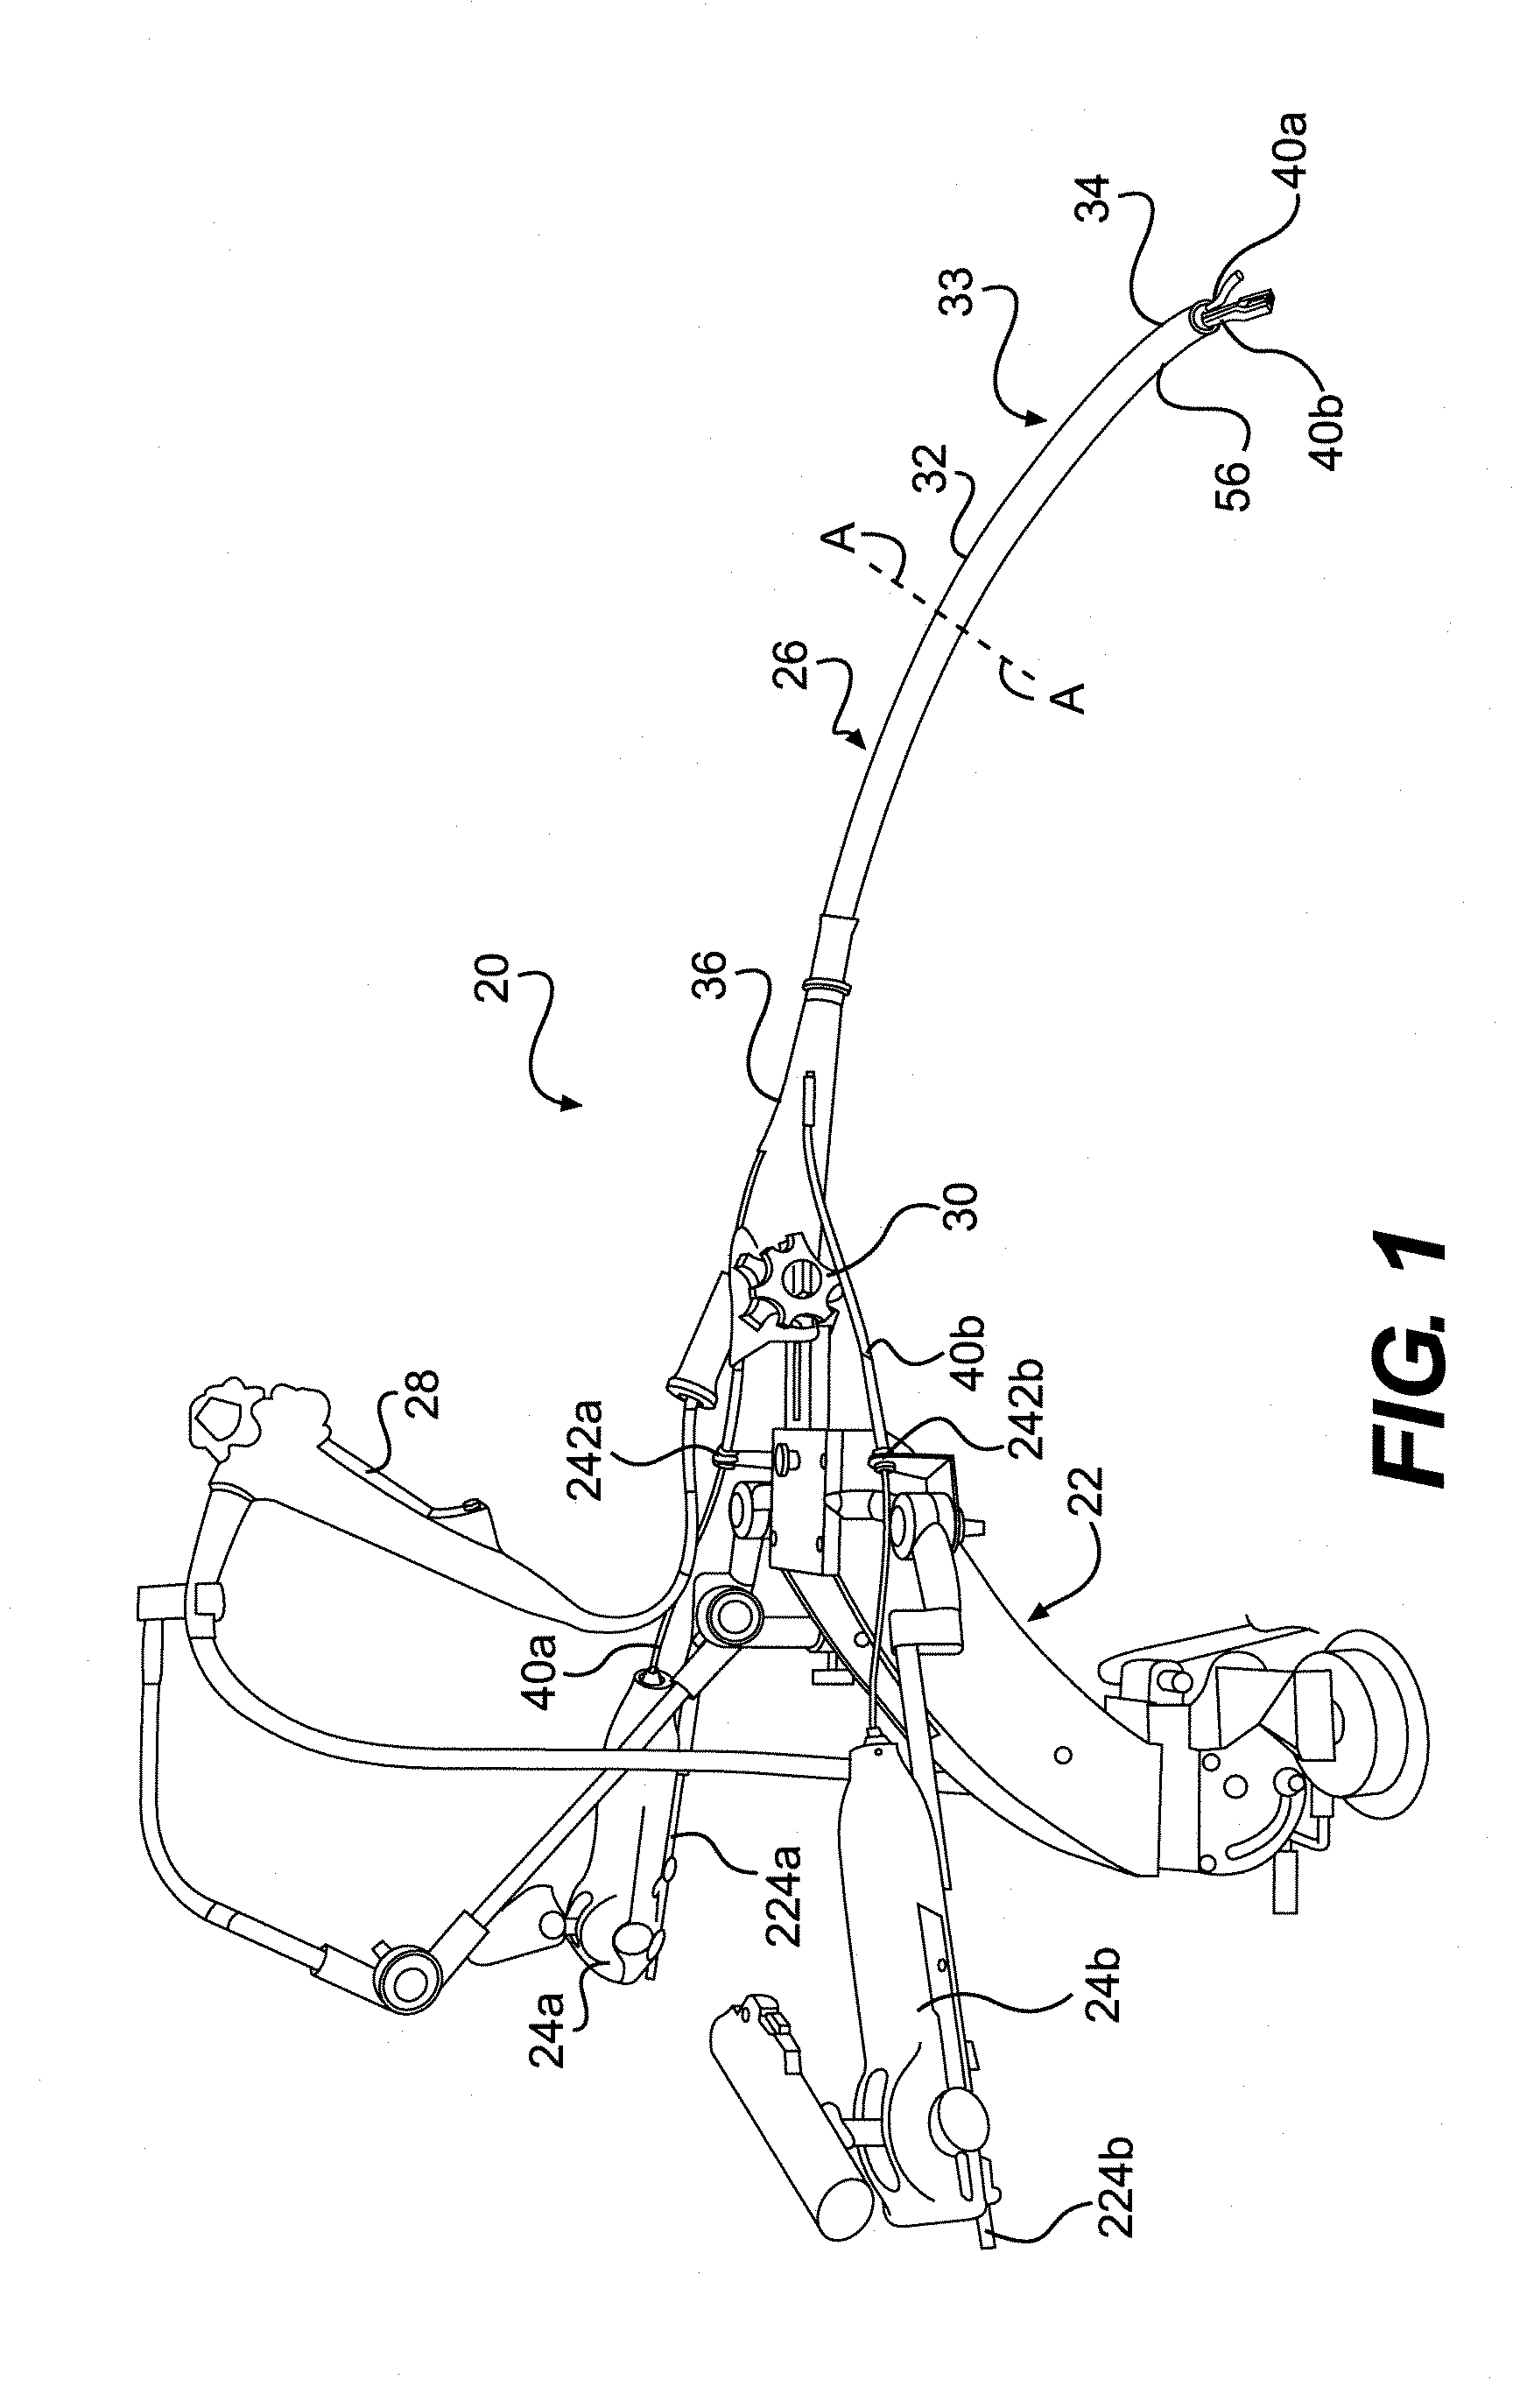 Direct drive instruments and methods of use